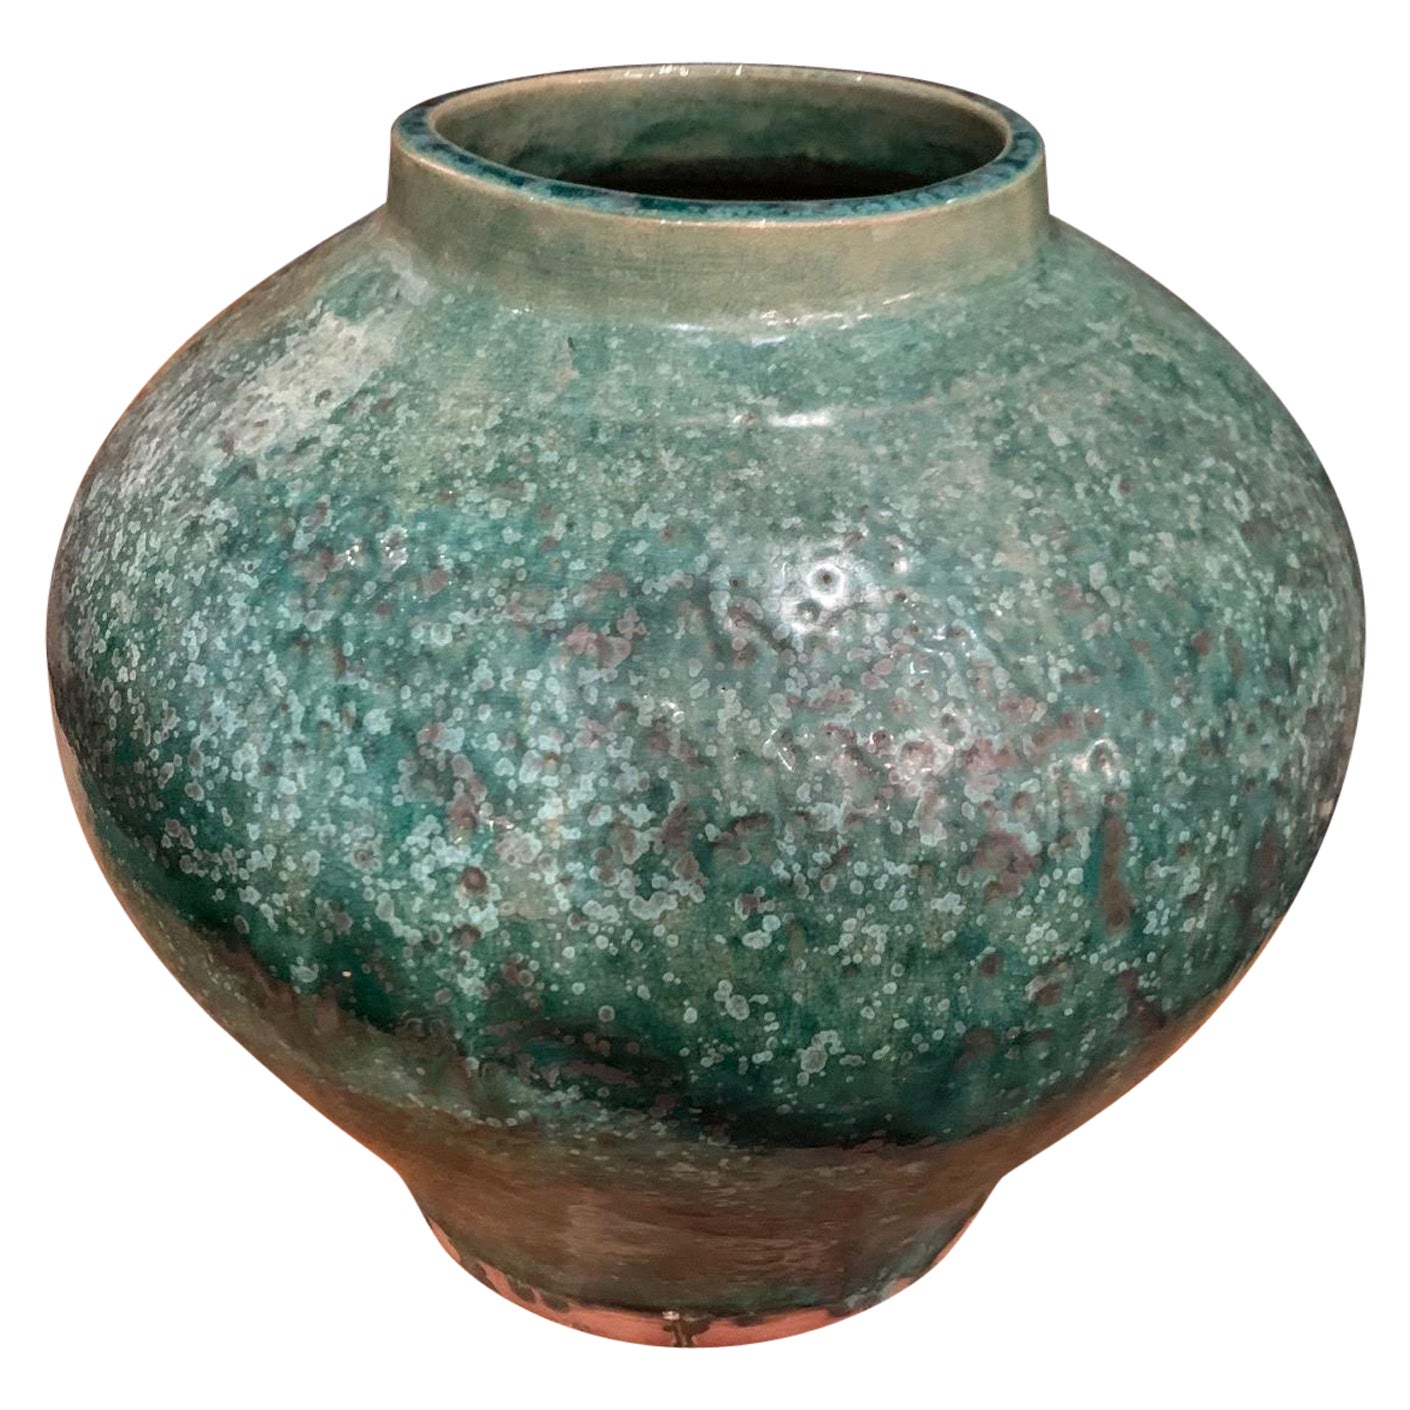 Emerald and Deep Turquoise Textured Vase, China, Contemporary